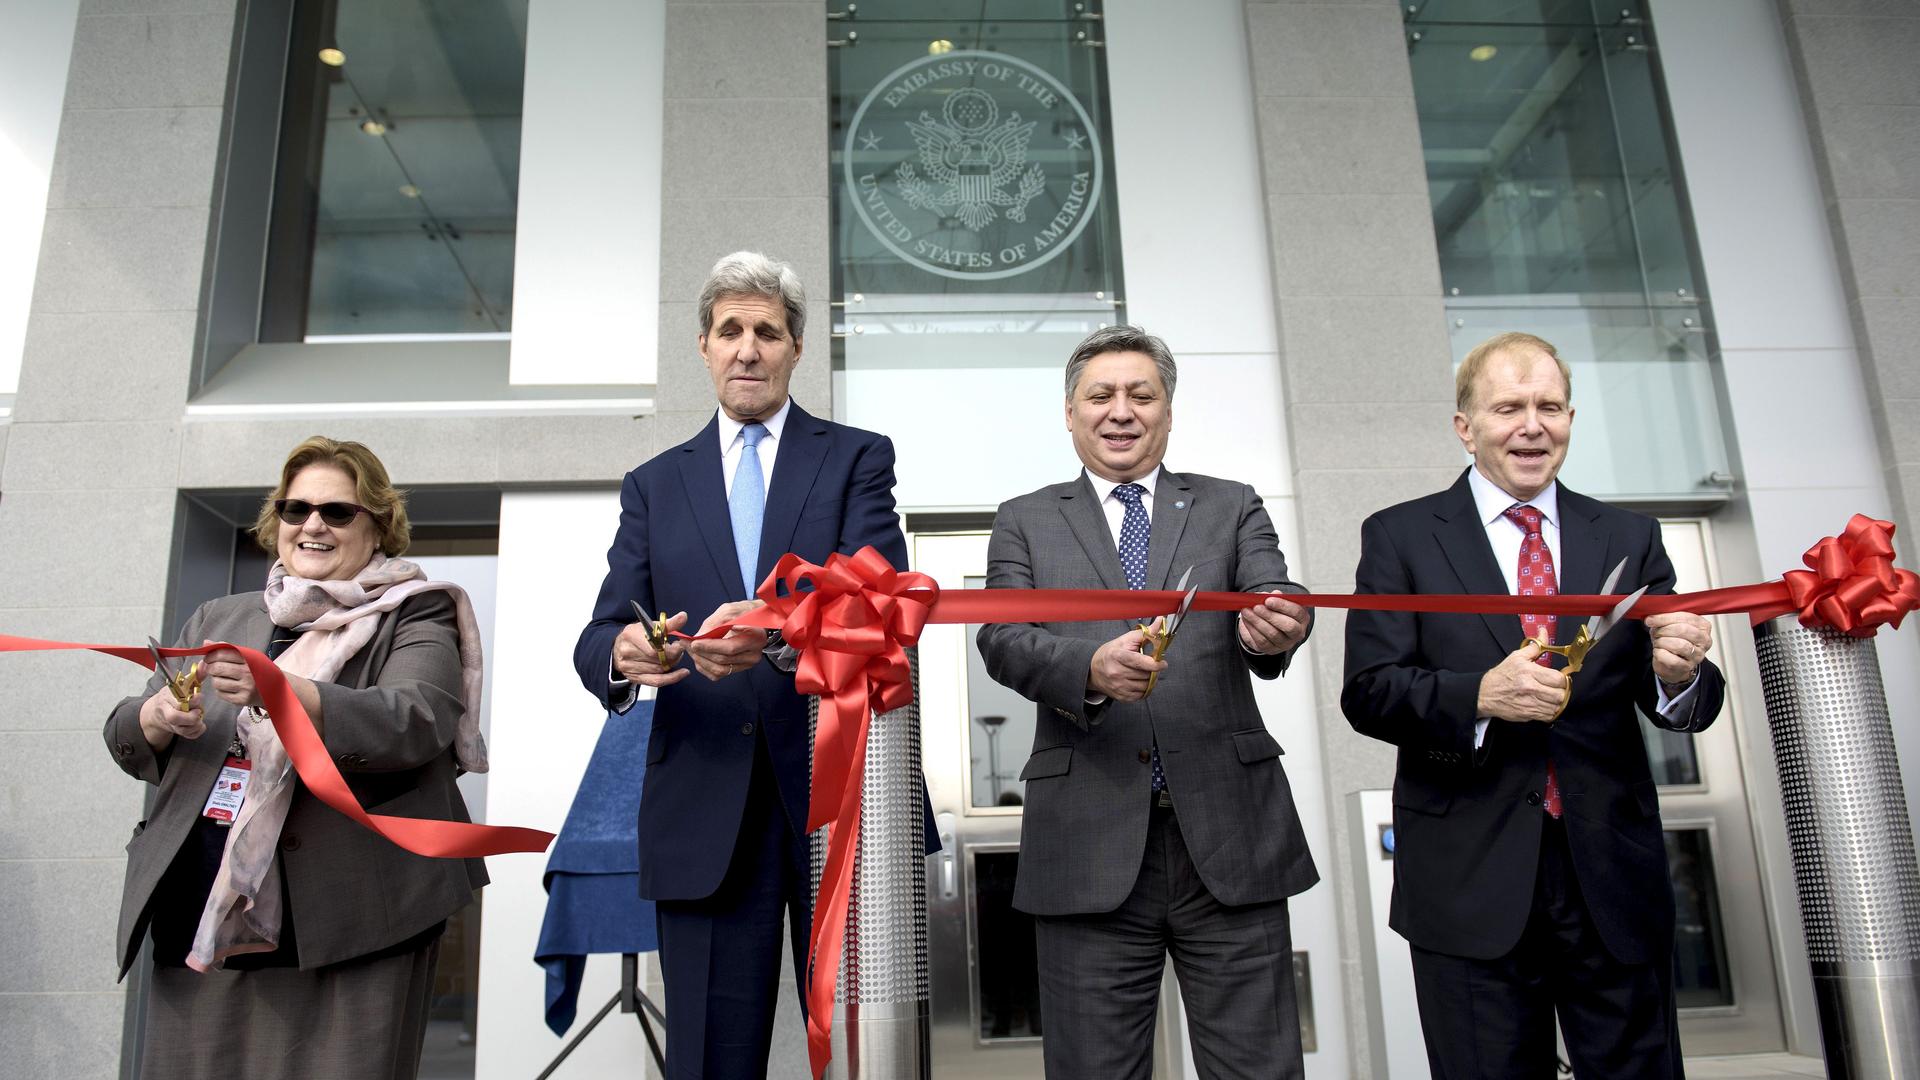 Secretary of State John Kerry takes part in a ceremony in October to open the new US embassy in Bishkek, Kyrgyzstan, together with US ambassador, Sheila Gwaltney (L). Gwaltney was confirmed by the Senate in August but dozens of her peers are still pending